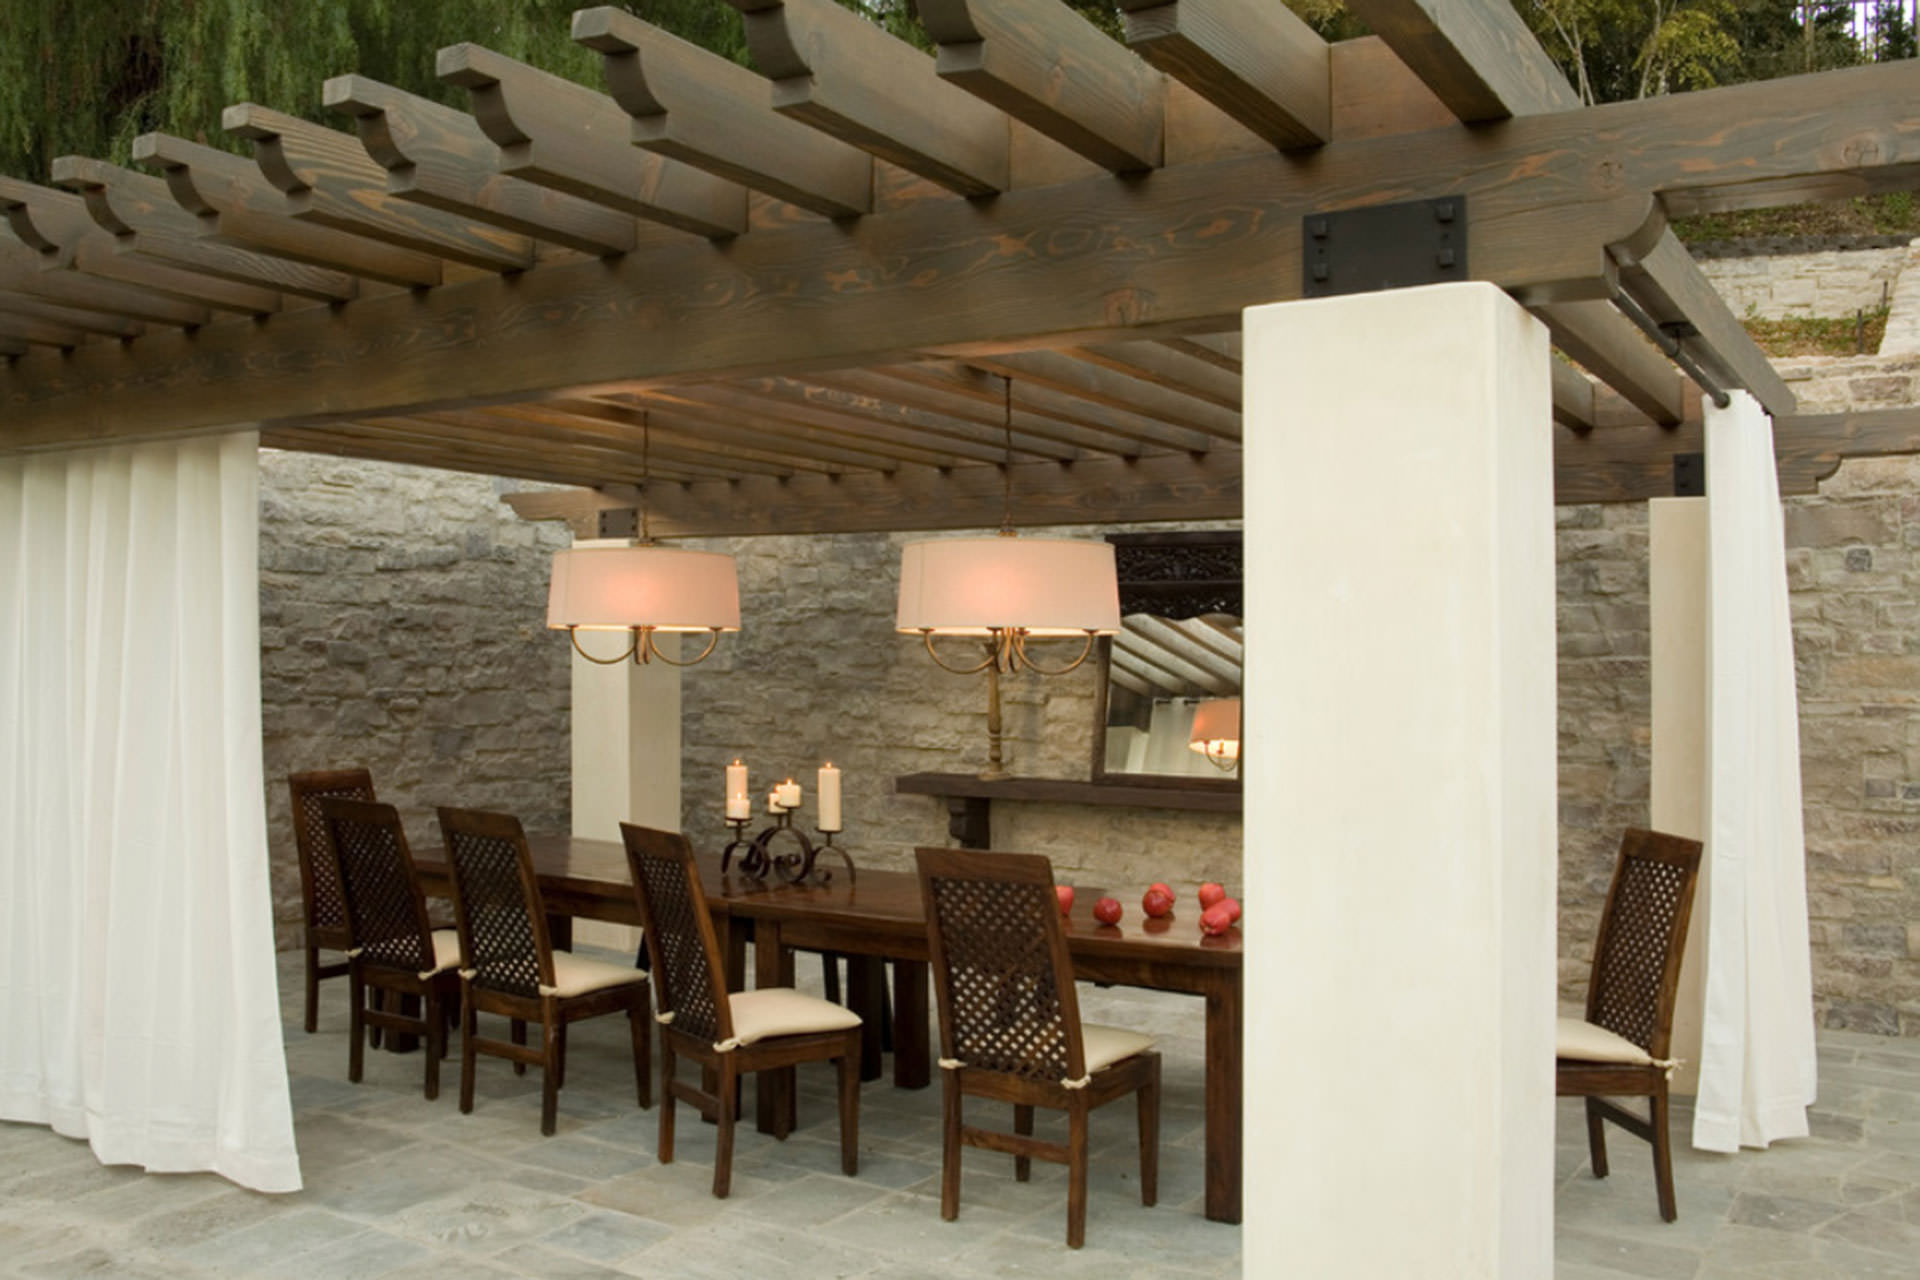 Outdoor Structure with dining area, lights and curtains